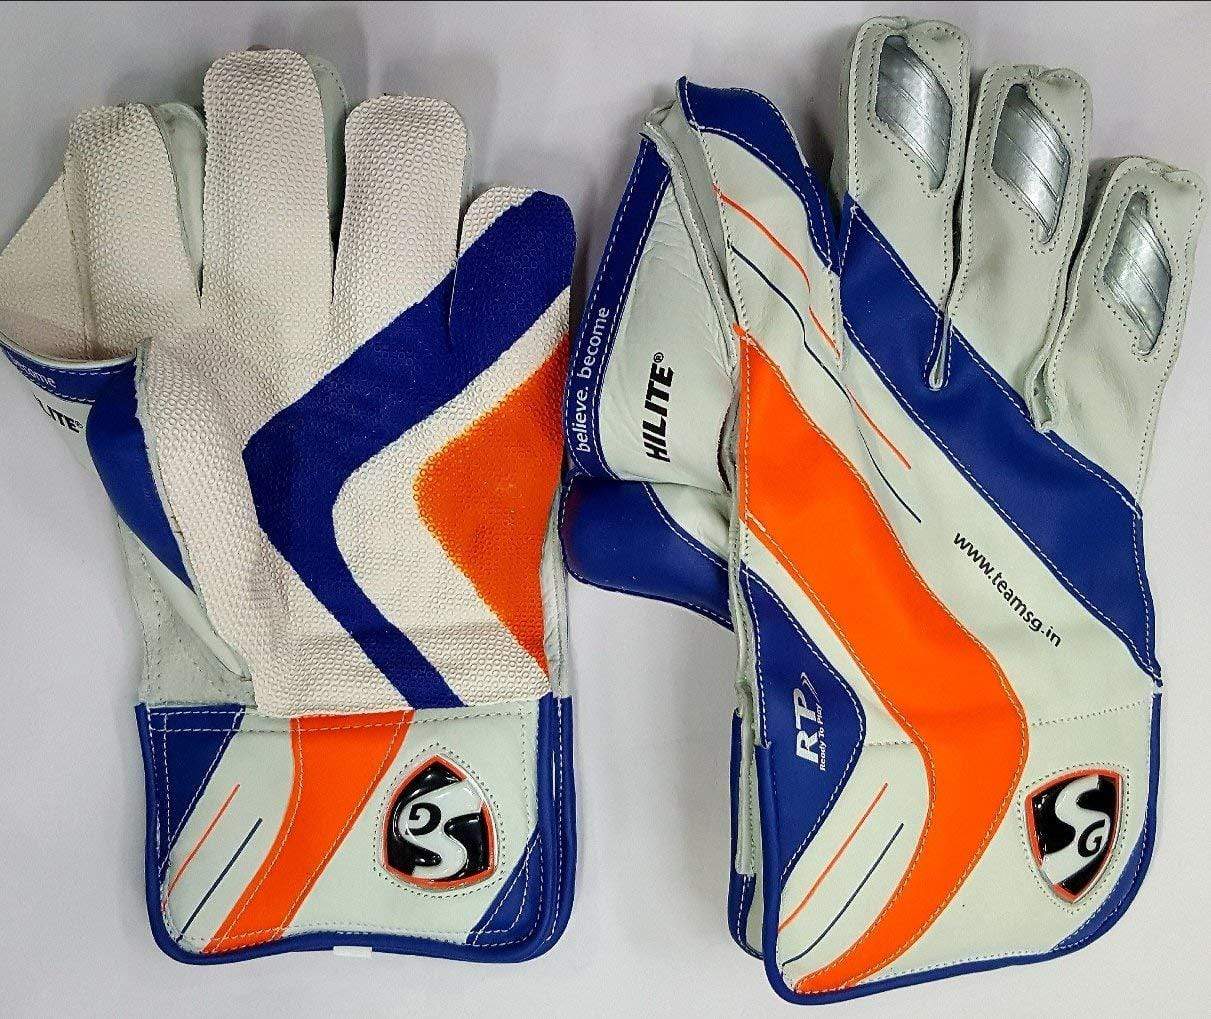 SG WicketKeeping Mens SG Hilite Wicketkeeping Gloves 2019